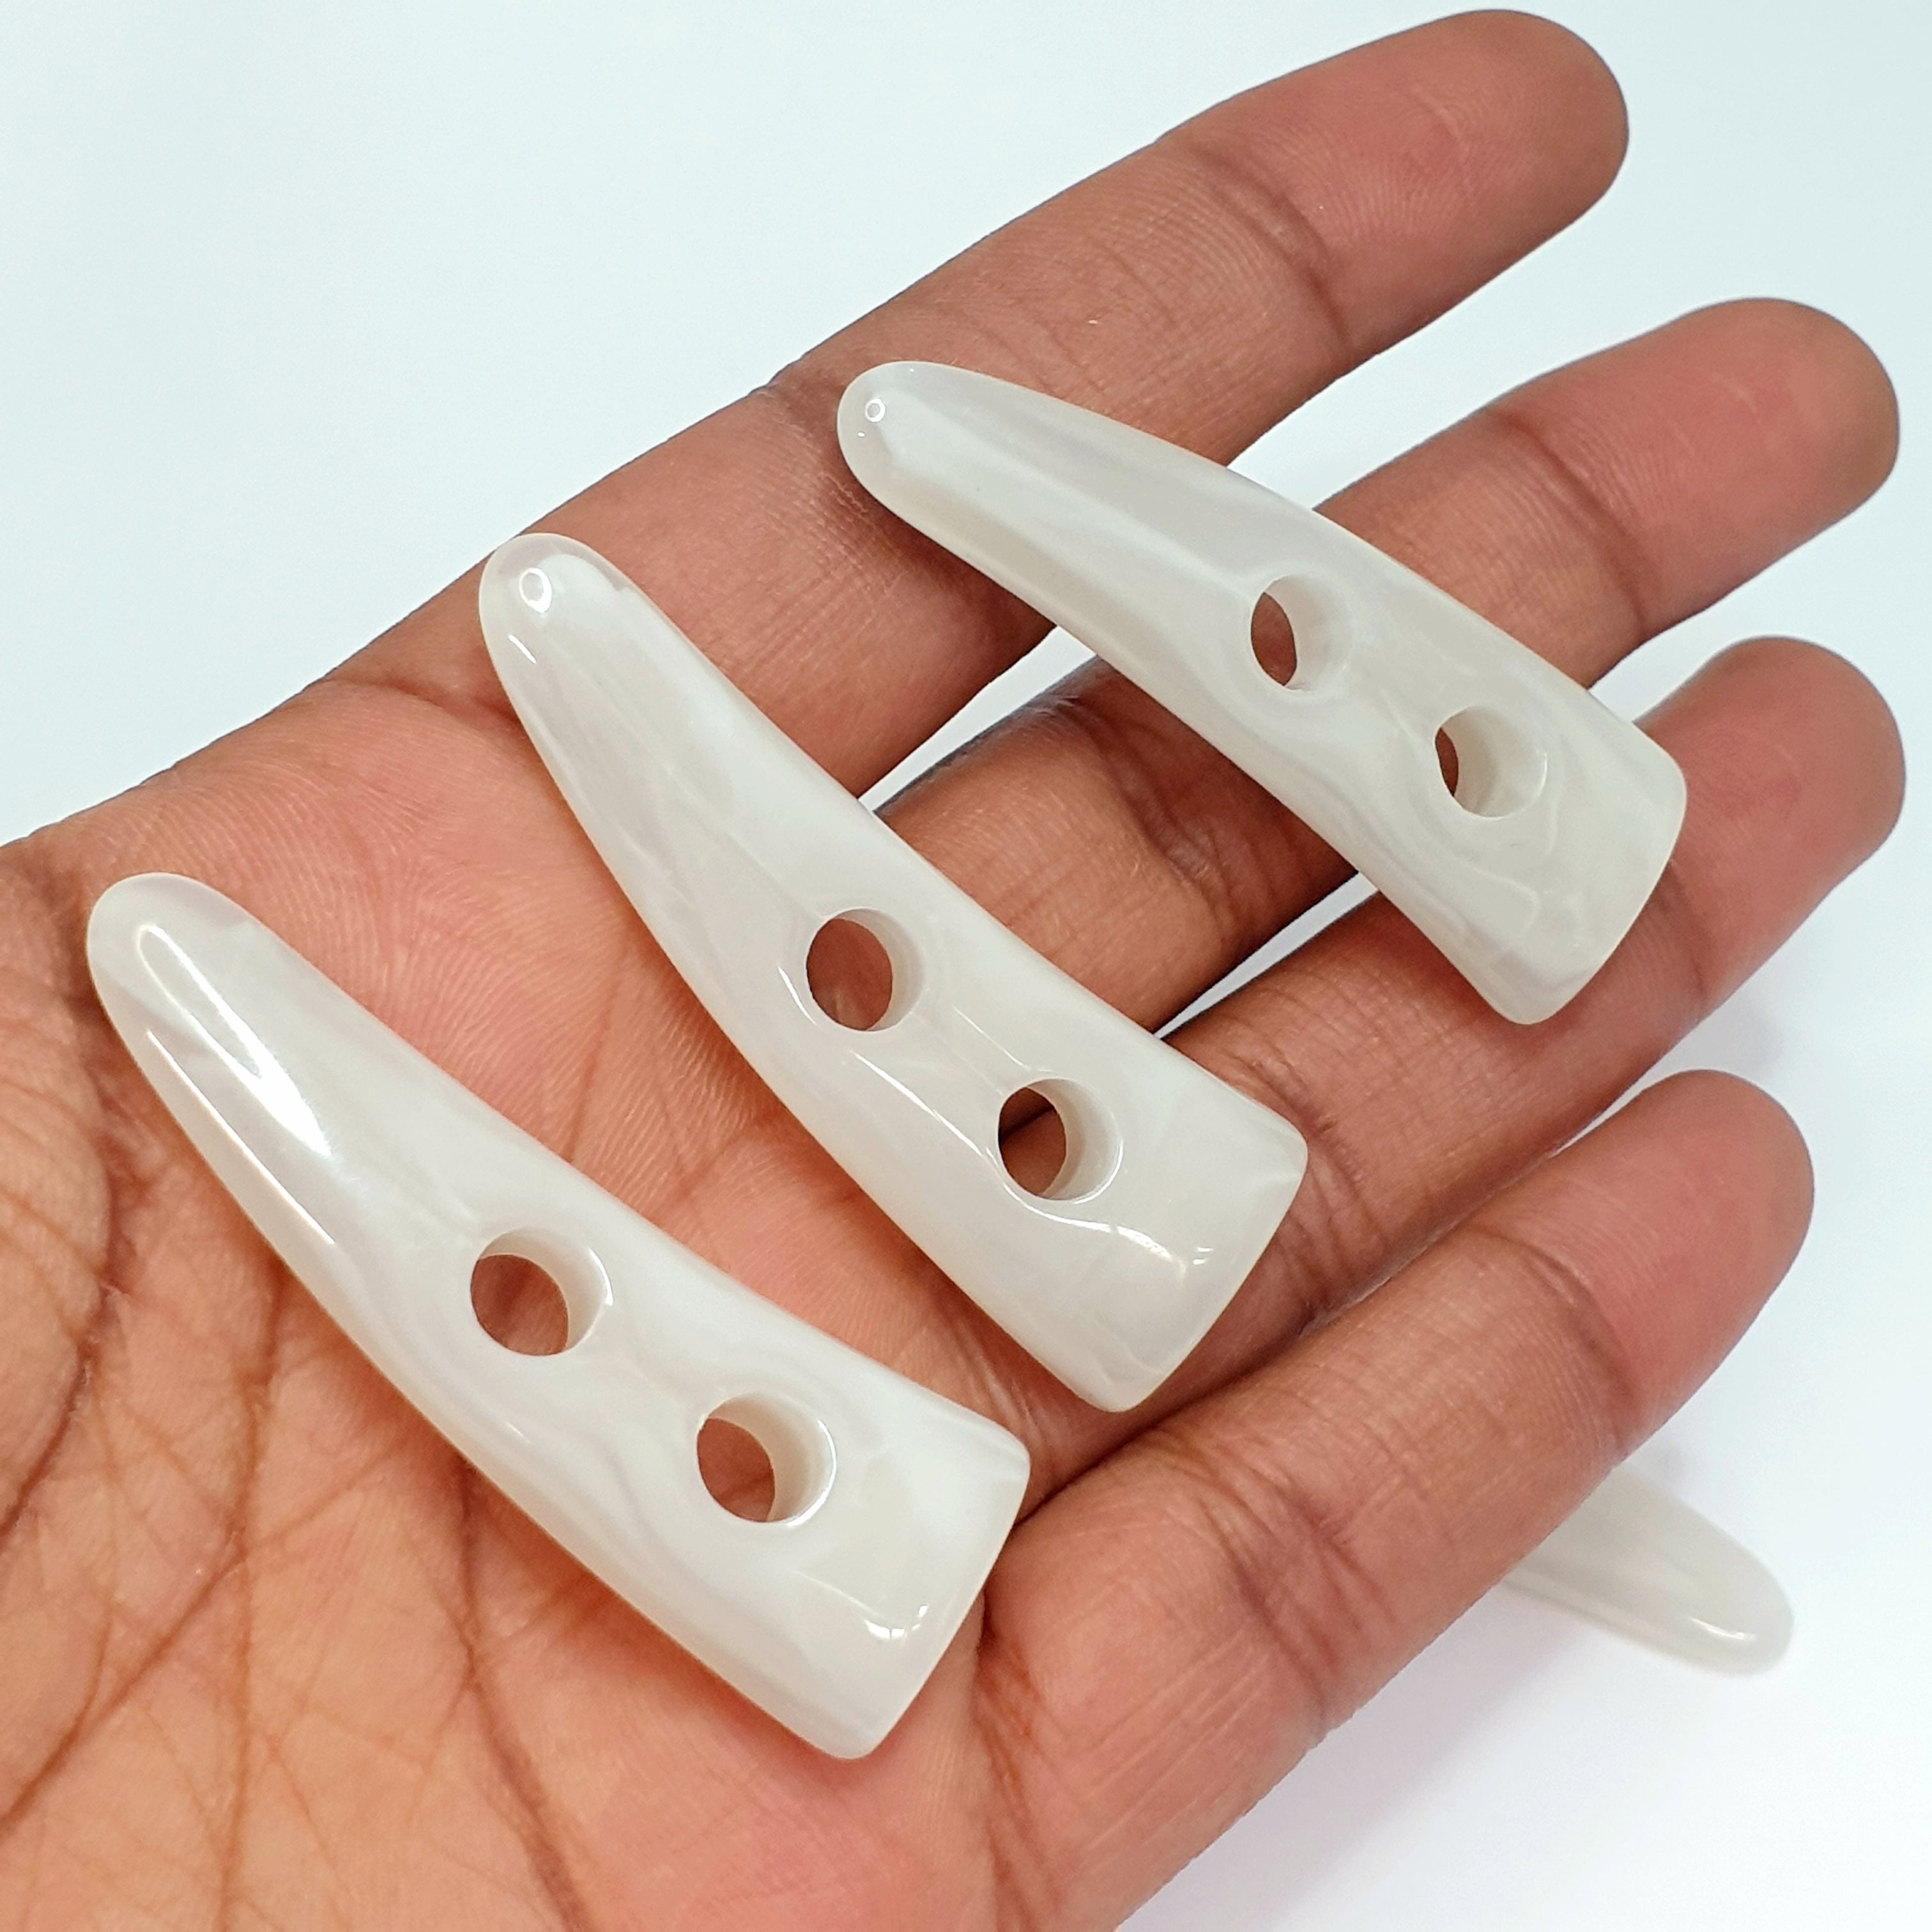 MajorCrafts 10pcs 50mm Pearl White Horn / Tooth Shape 2 Holes Sewing Toggle Acrylic Buttons